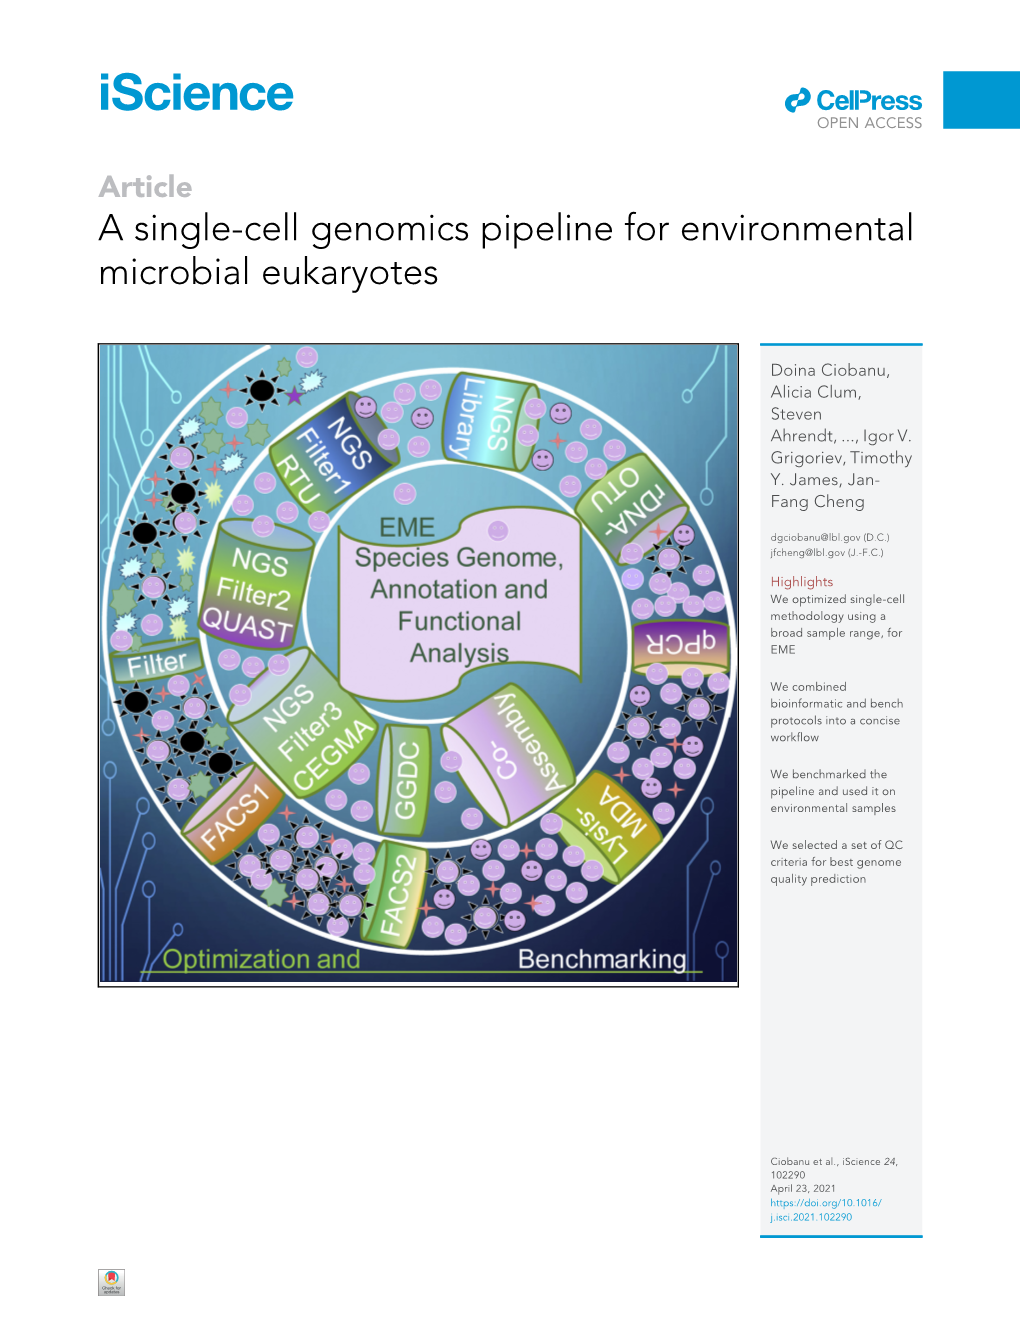 A Single-Cell Genomics Pipeline for Environmental Microbial Eukaryotes